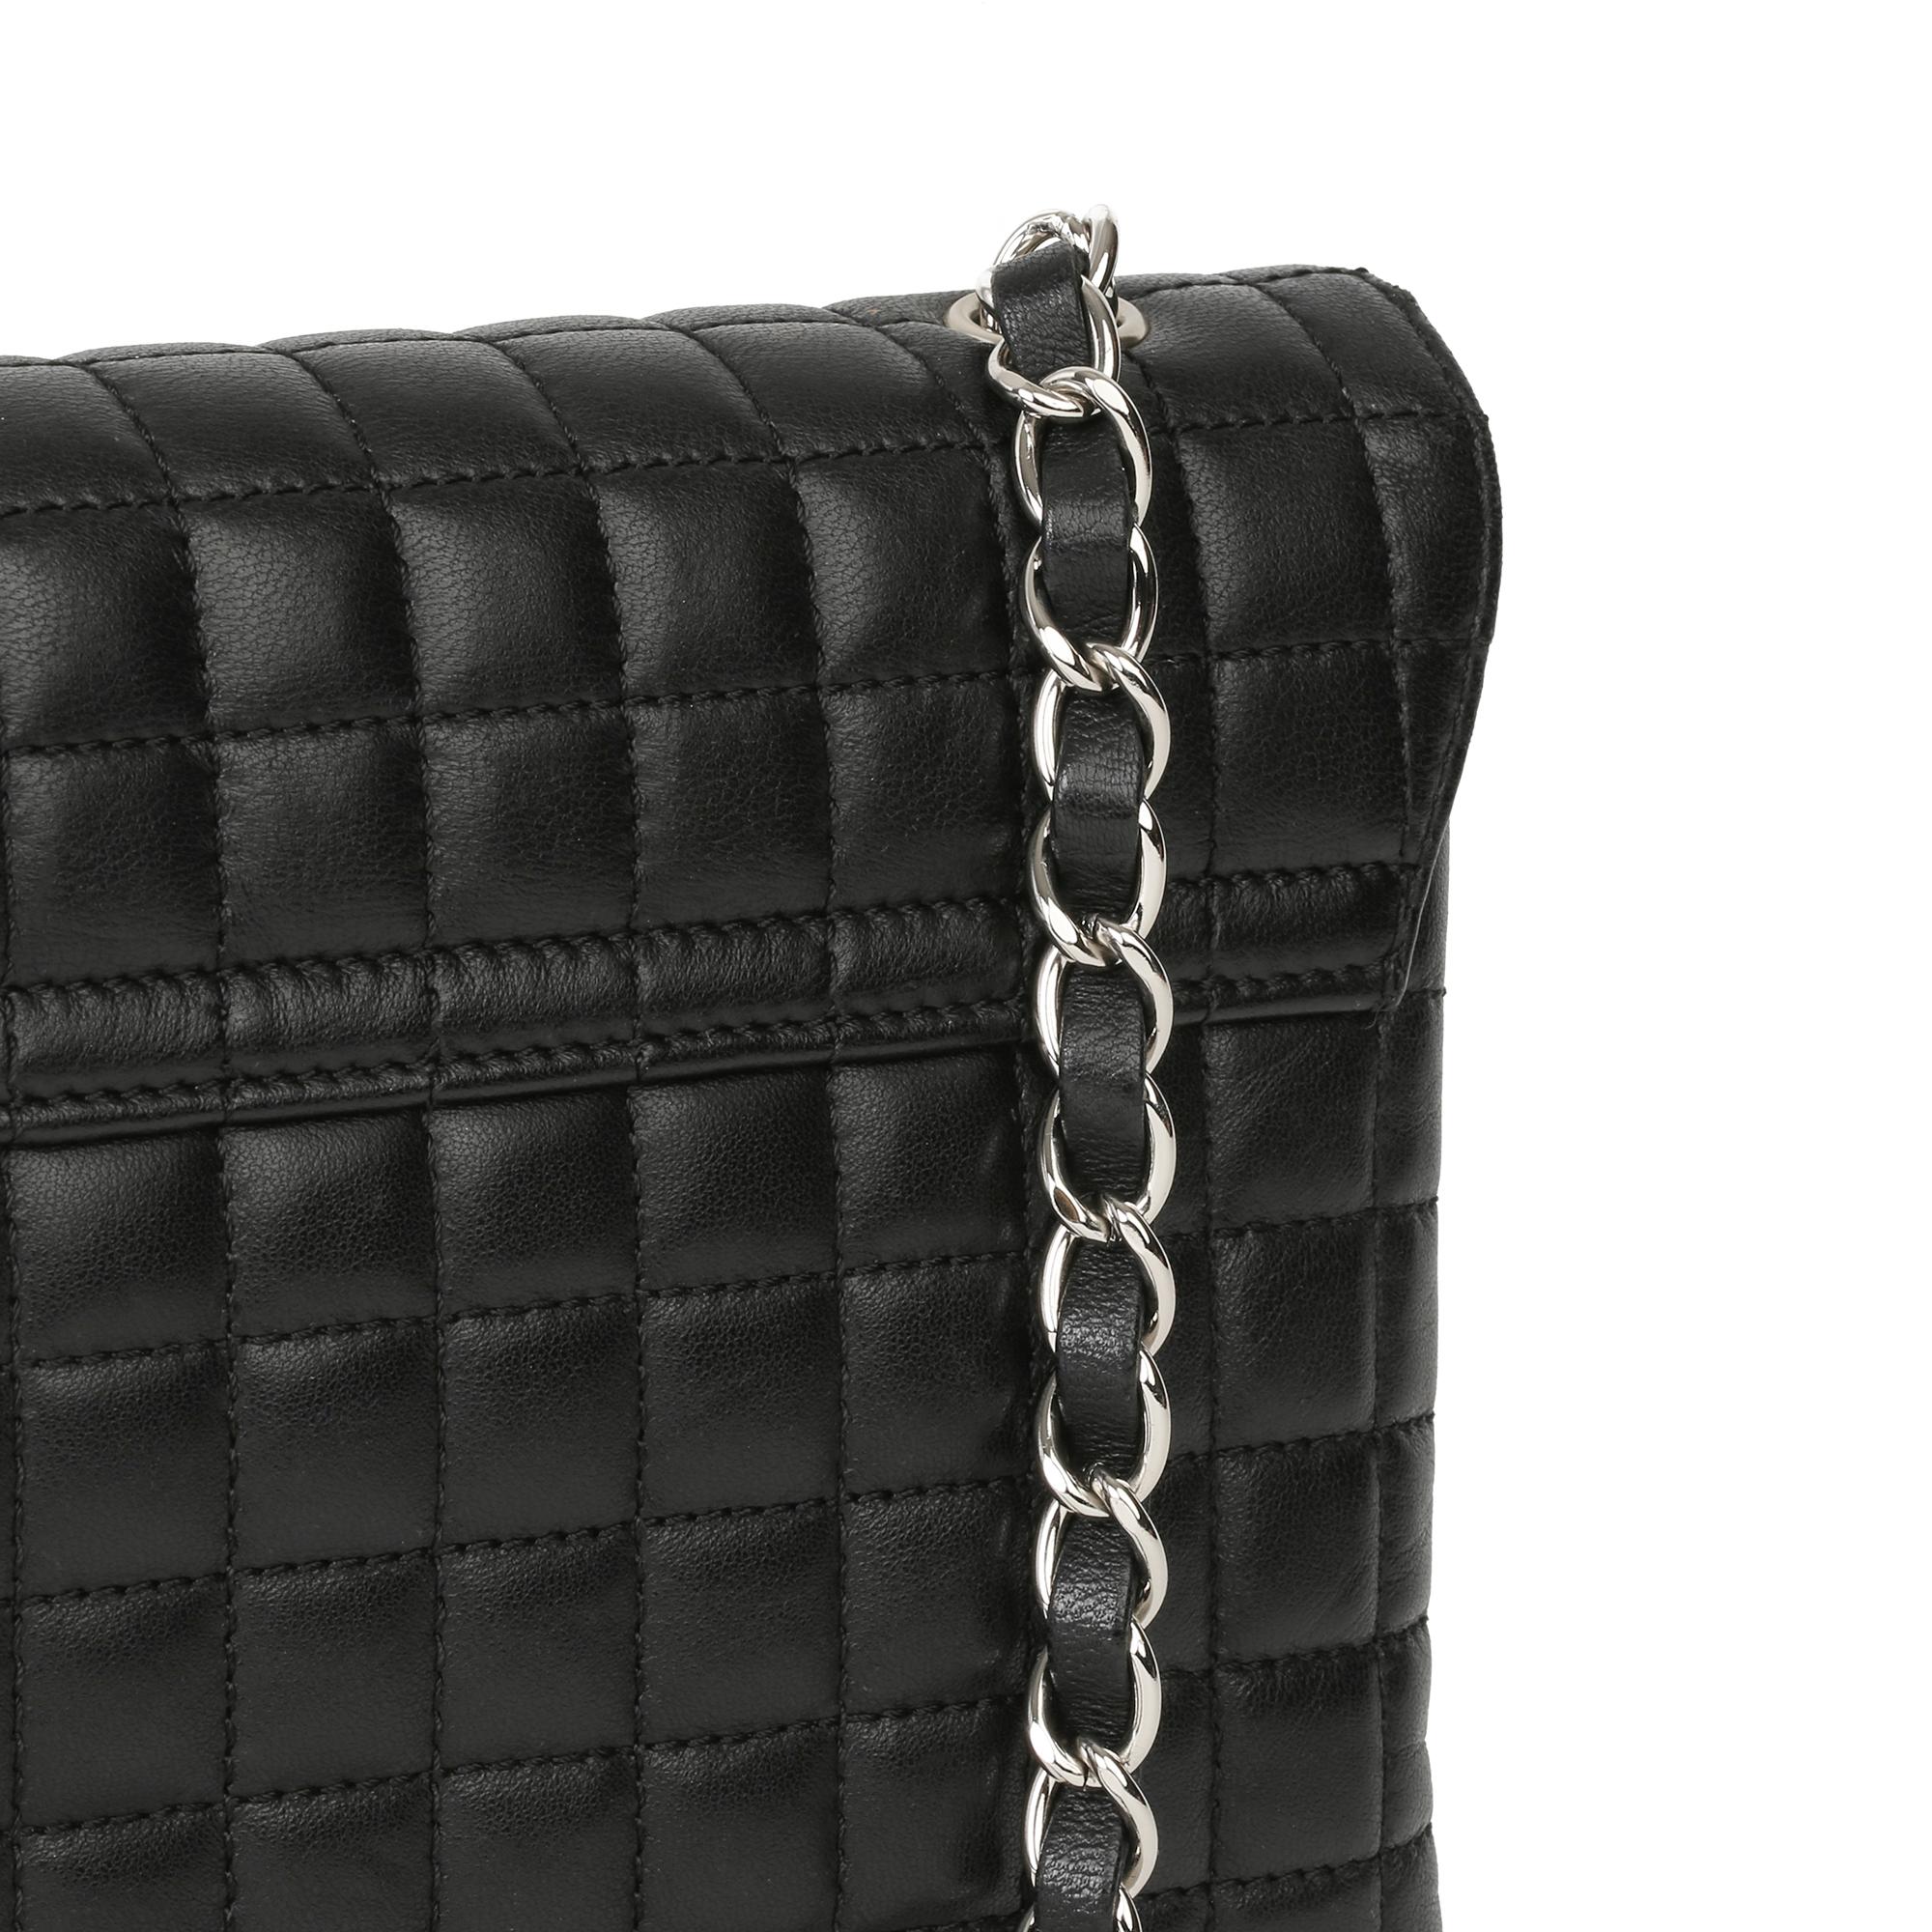 2005 Chanel Black Chocolate Bar Quilted Lambskin & Patent Leather No. 5 Camellia 3